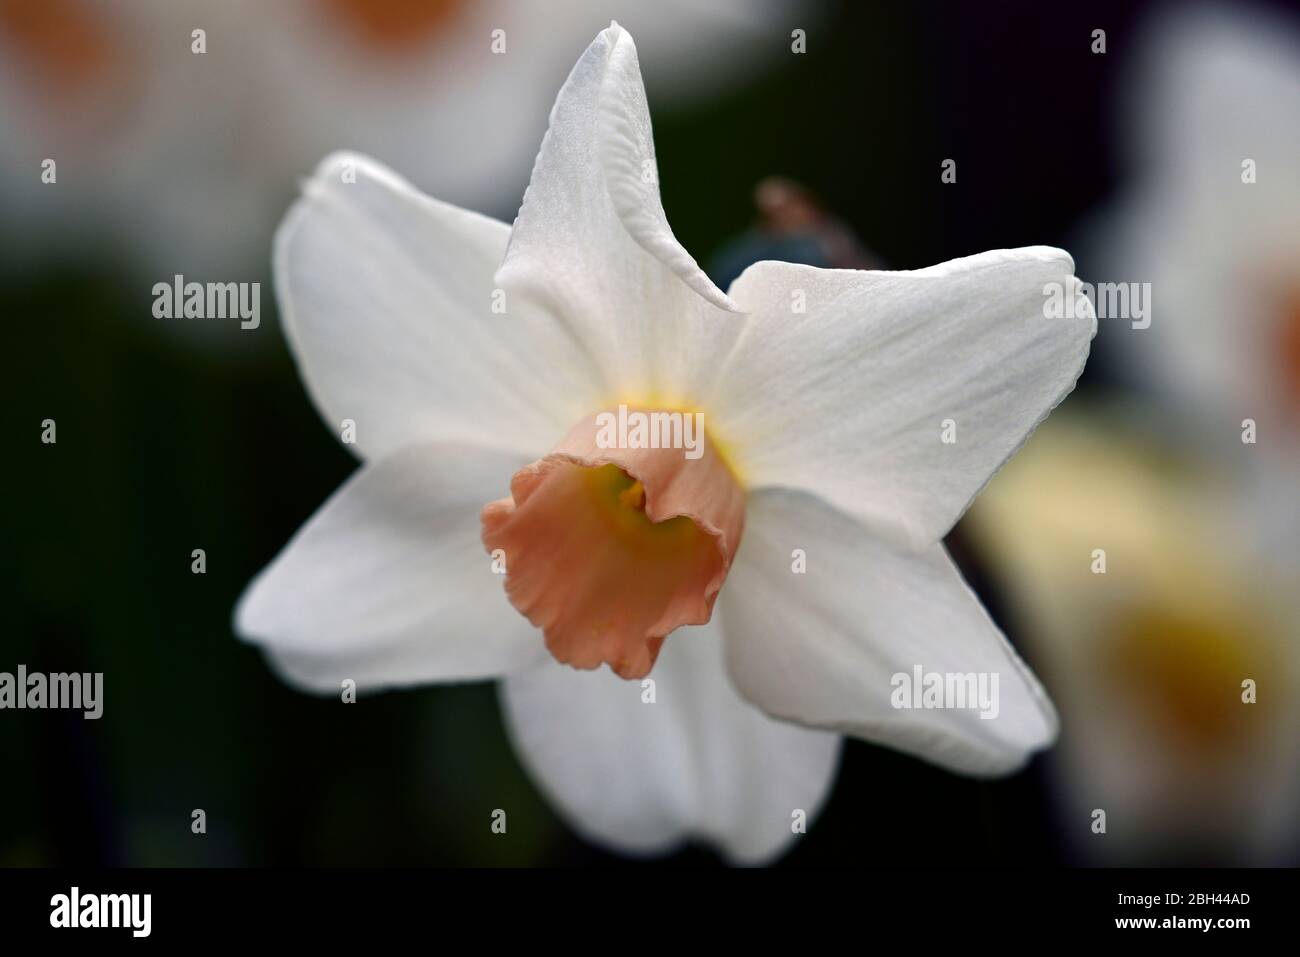 Narcissus Bell Song,Jonquil Daffodil,outer petals ivory-white,pale yellowish-pink cups,spring,garden,flowers,scented,perfumed,RM Floral Stock Photo